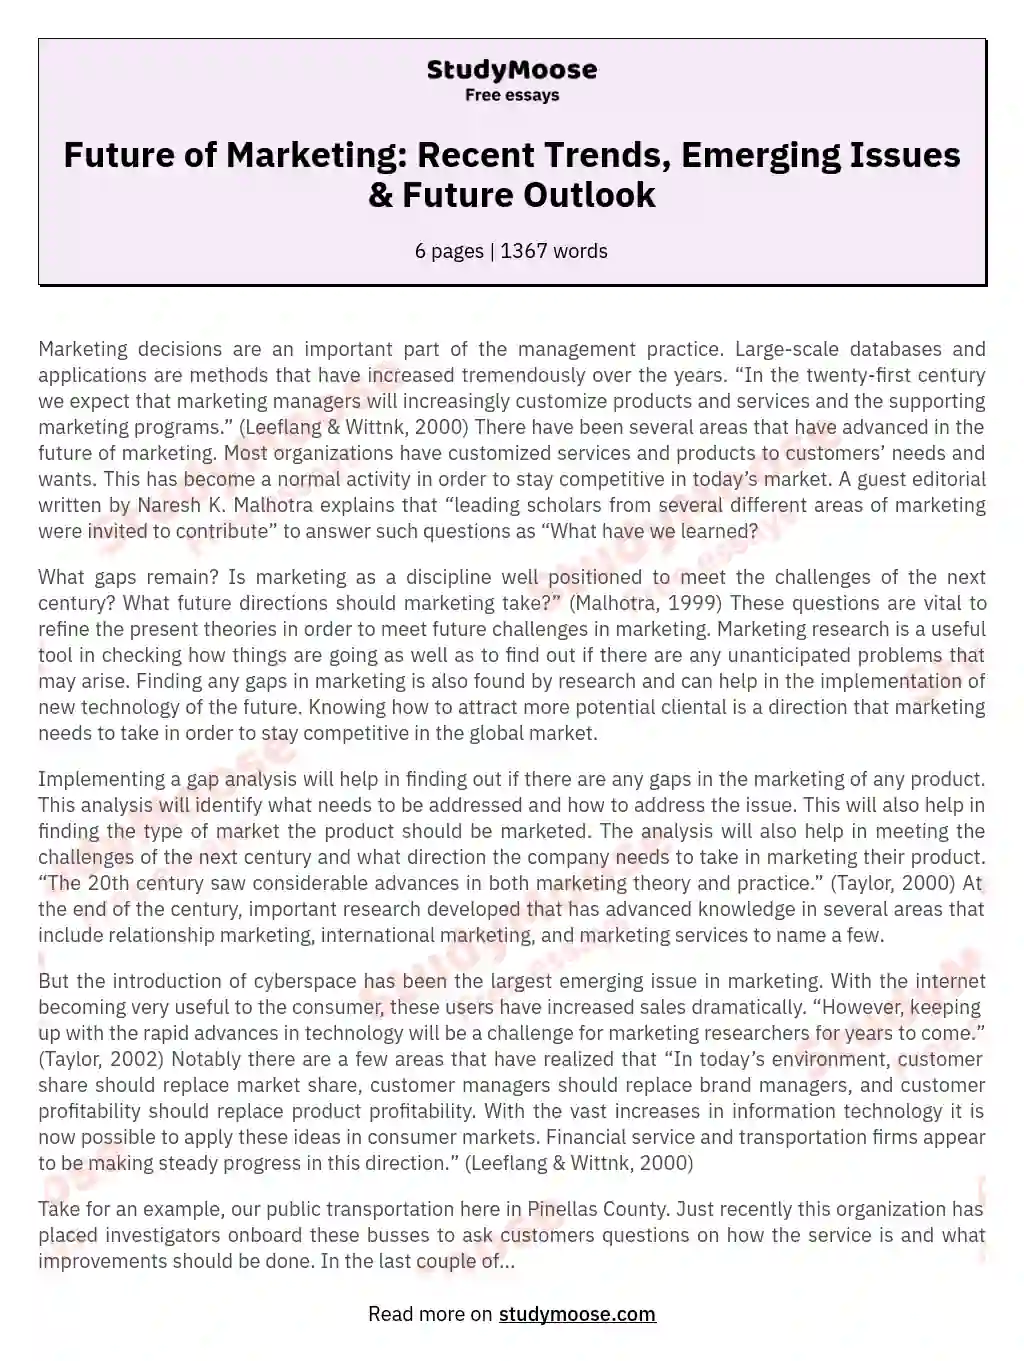 Future of Marketing: Recent Trends, Emerging Issues & Future Outlook essay